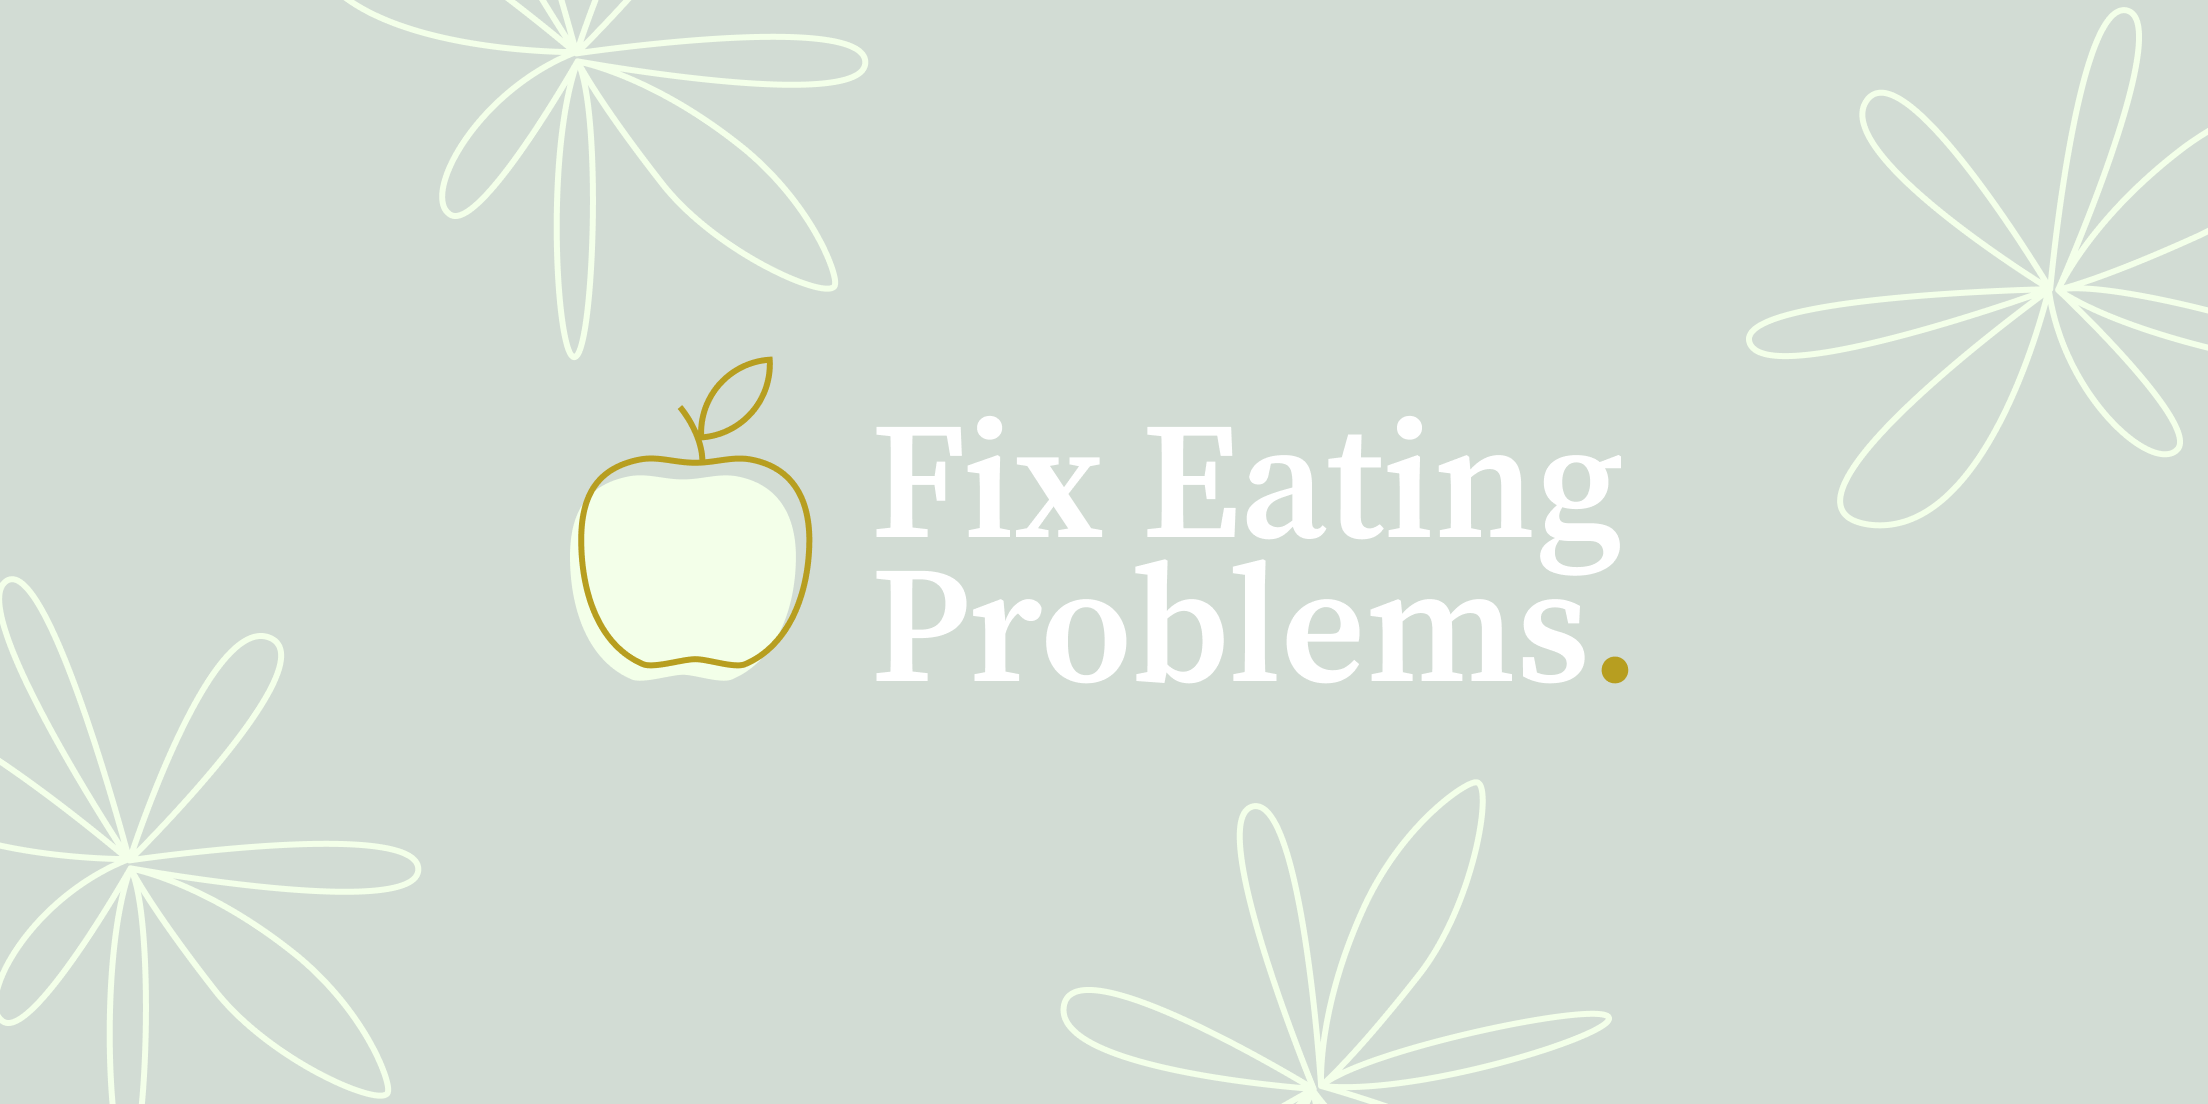 Feeding Therapy for Autism: How to Fix Eating Problems